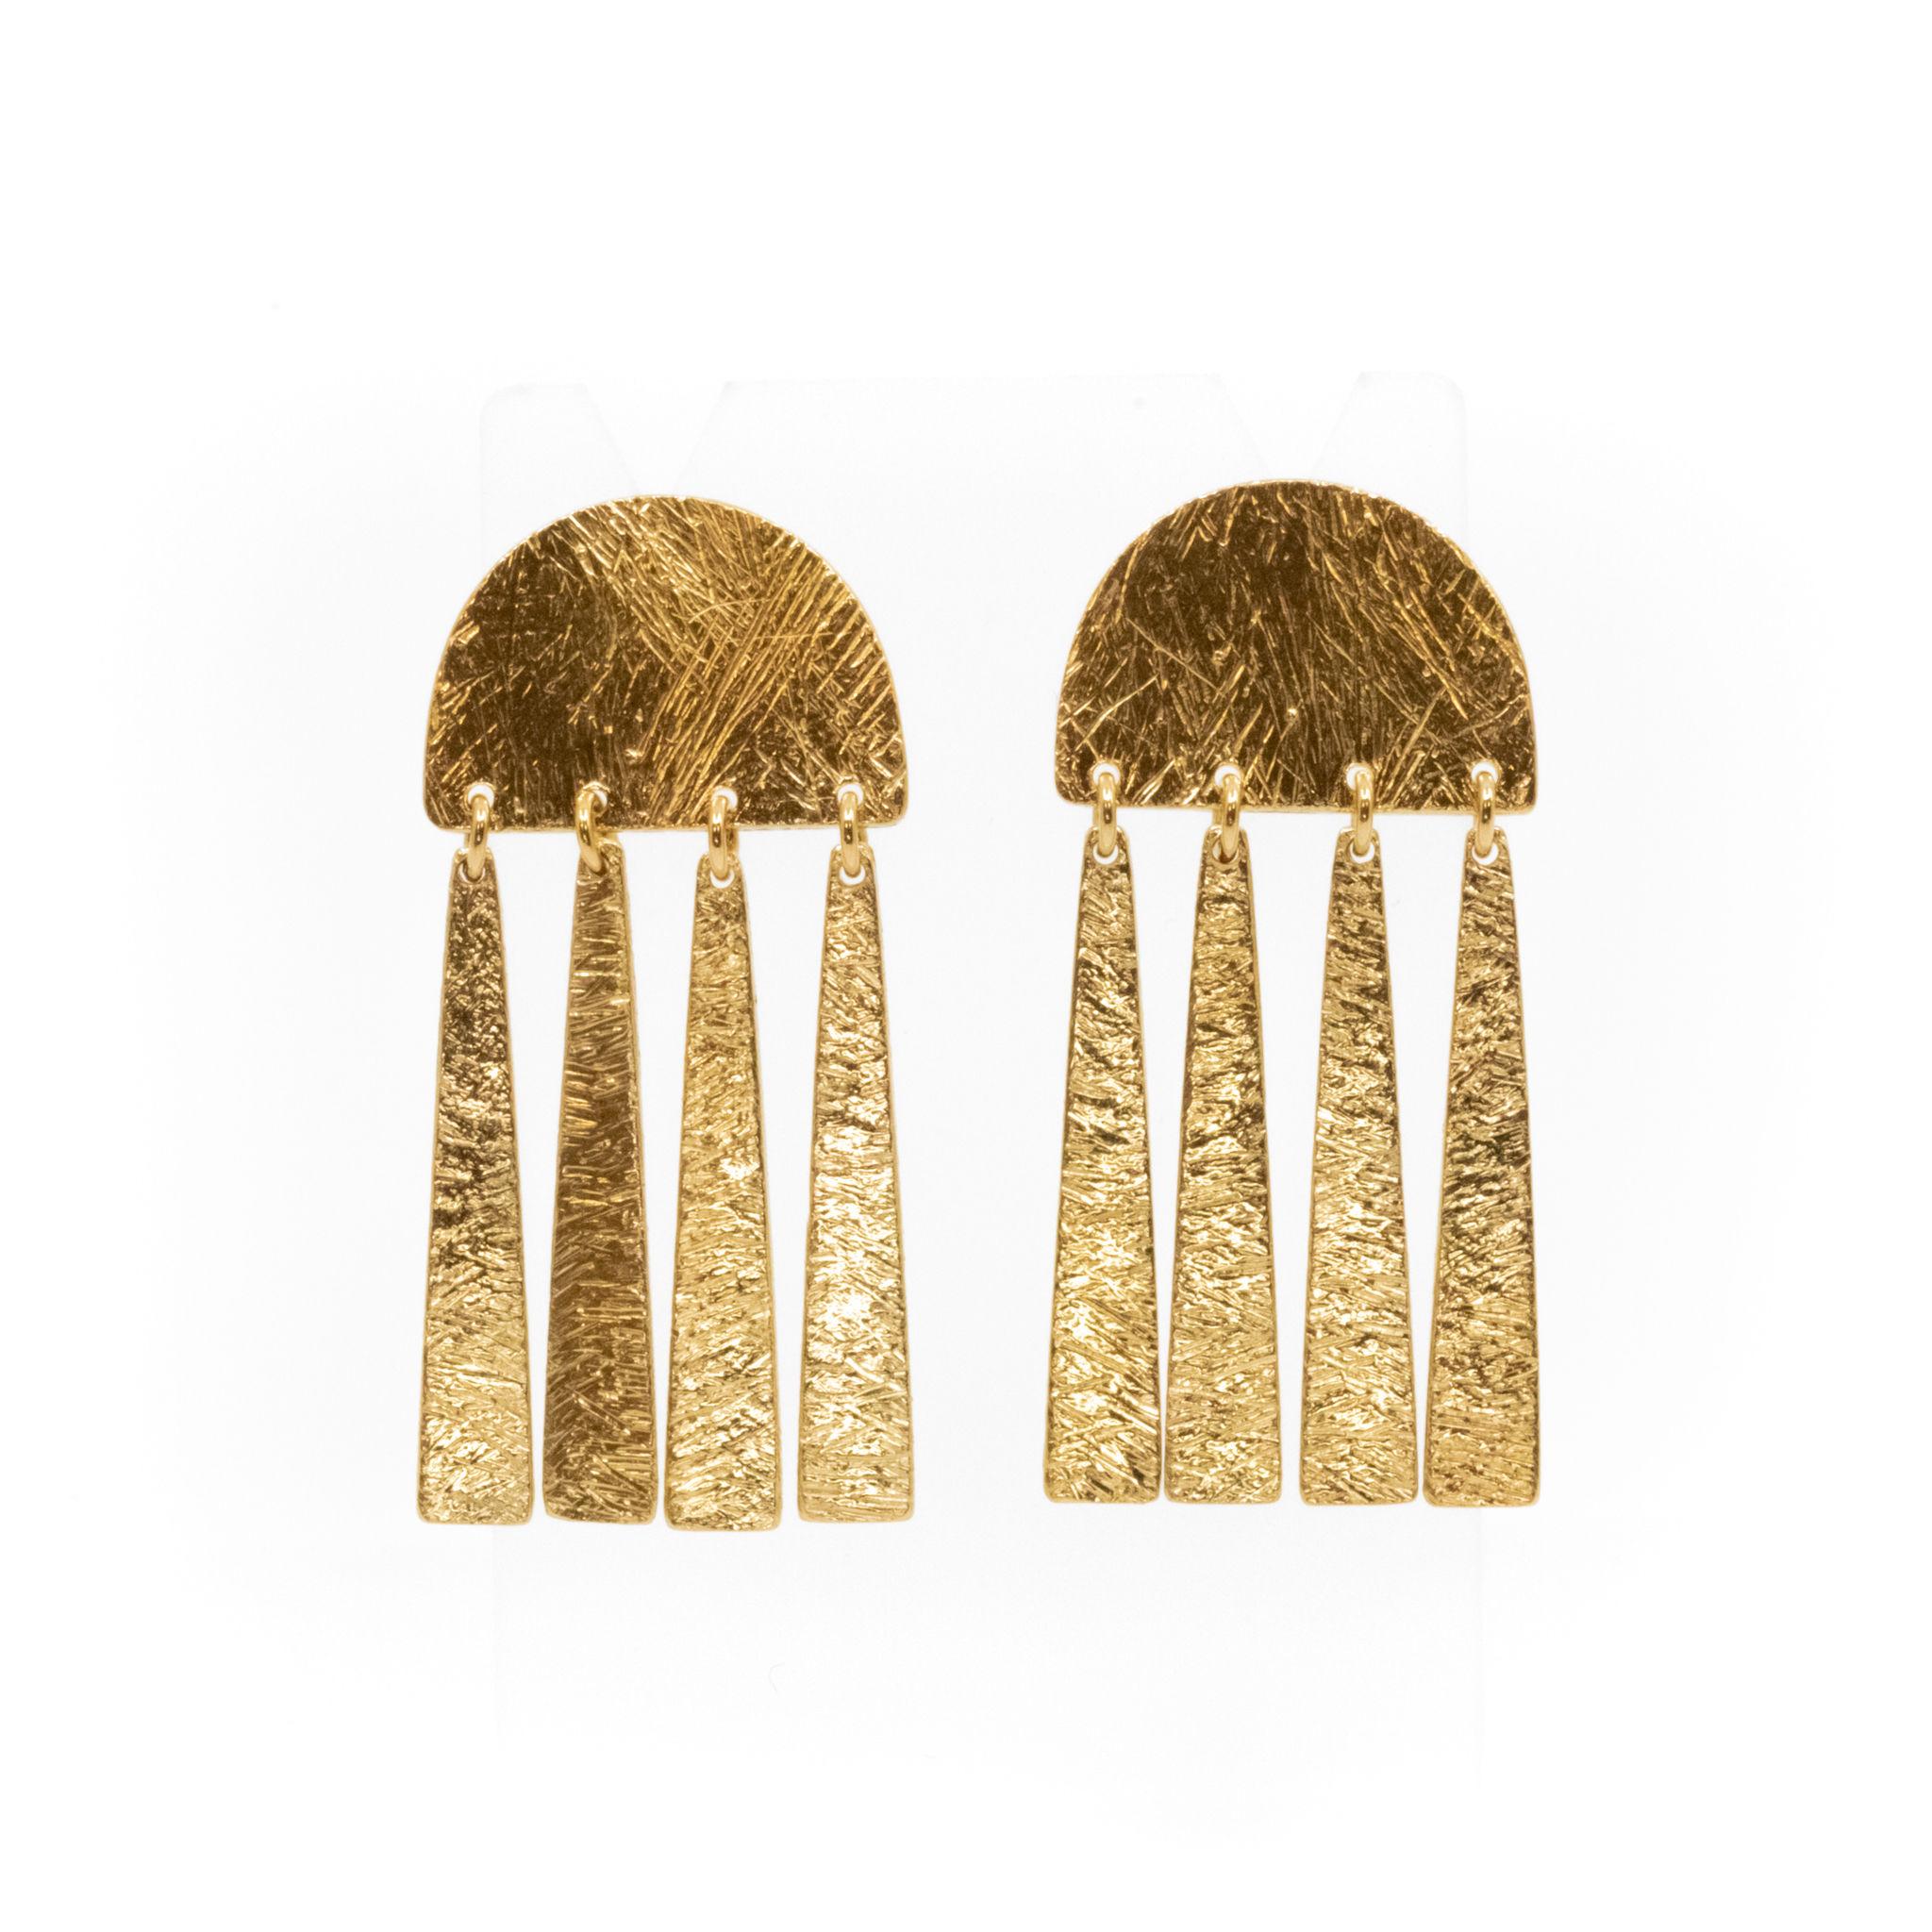 Heather Guidero Abstract Sculpture - "Carved Half Circles and Triangle Earrings" ethically sourced gold, contemporary